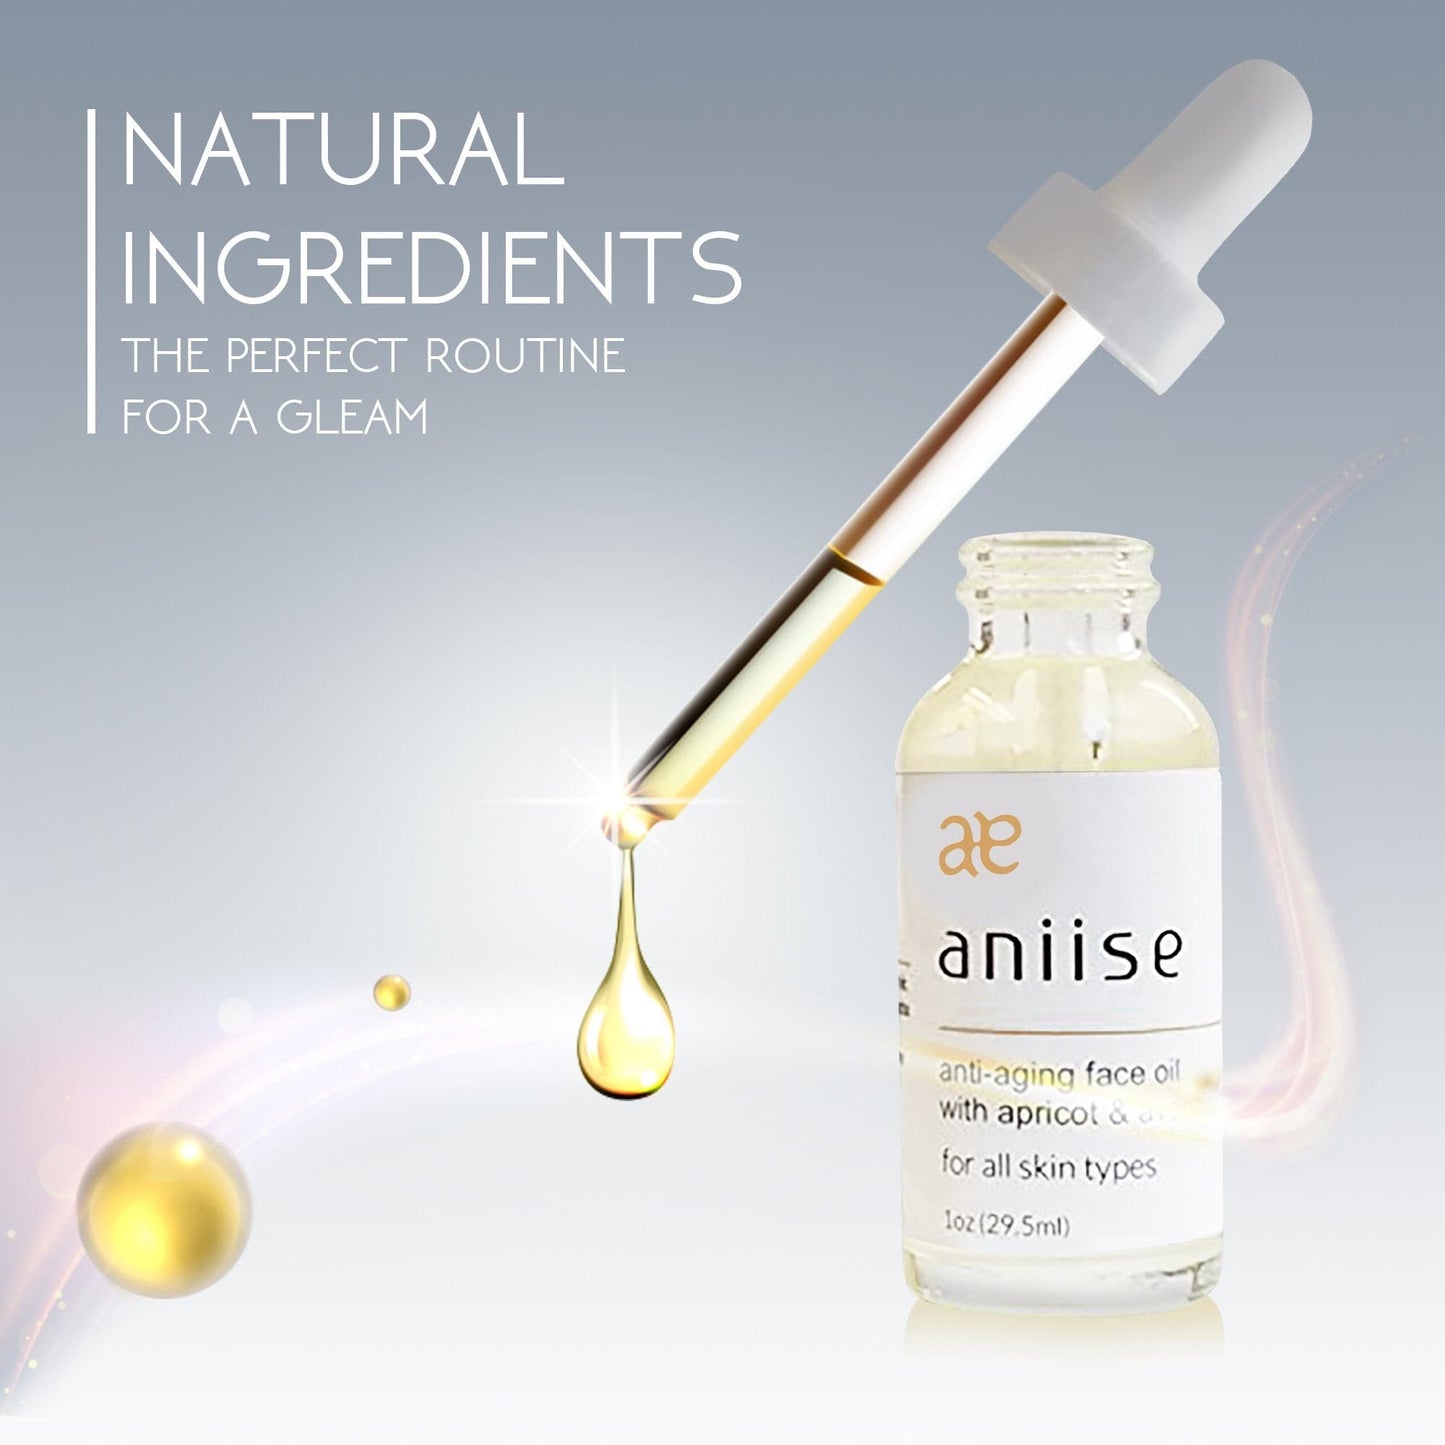 Anti–Aging Face Oil by Aniise